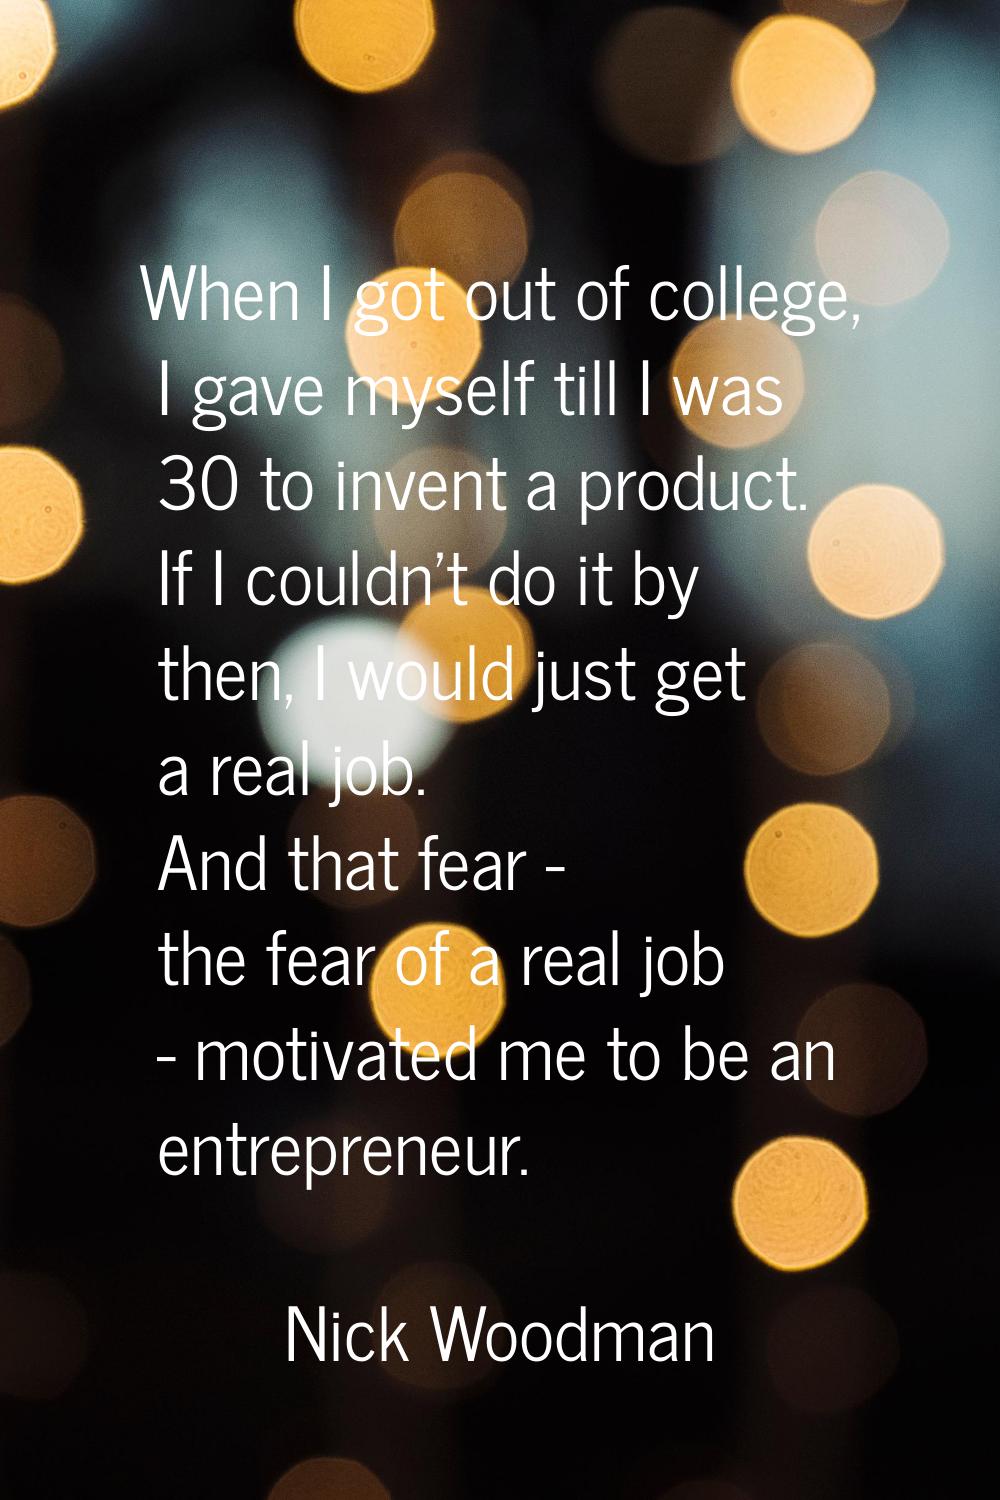 When I got out of college, I gave myself till I was 30 to invent a product. If I couldn't do it by 